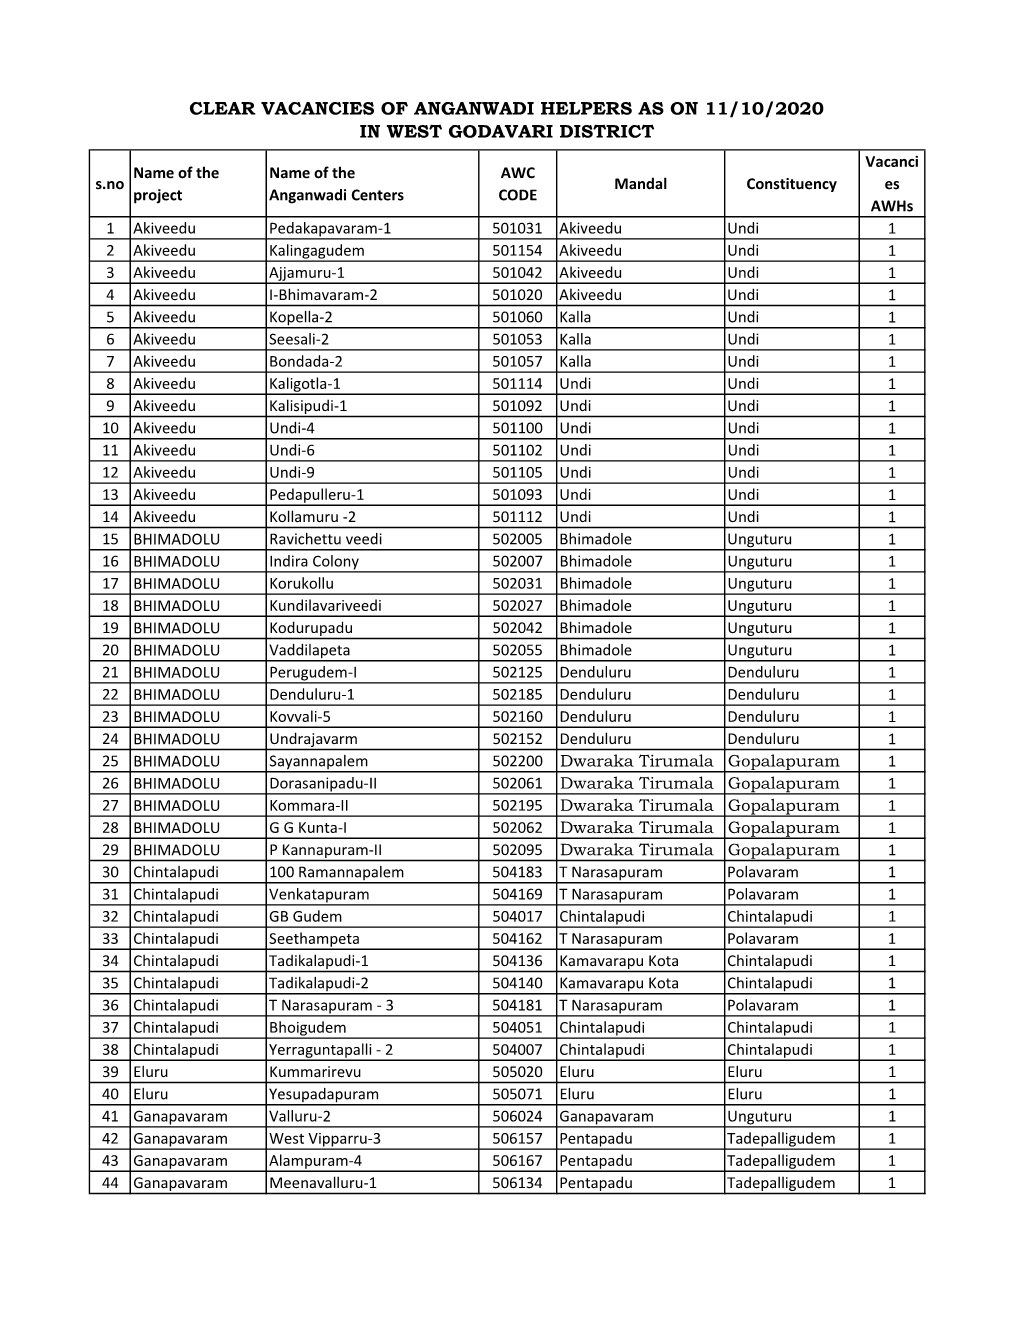 Clear Vacancies of Anganwadi Helpers As on 11/10/2020 in West Godavari District